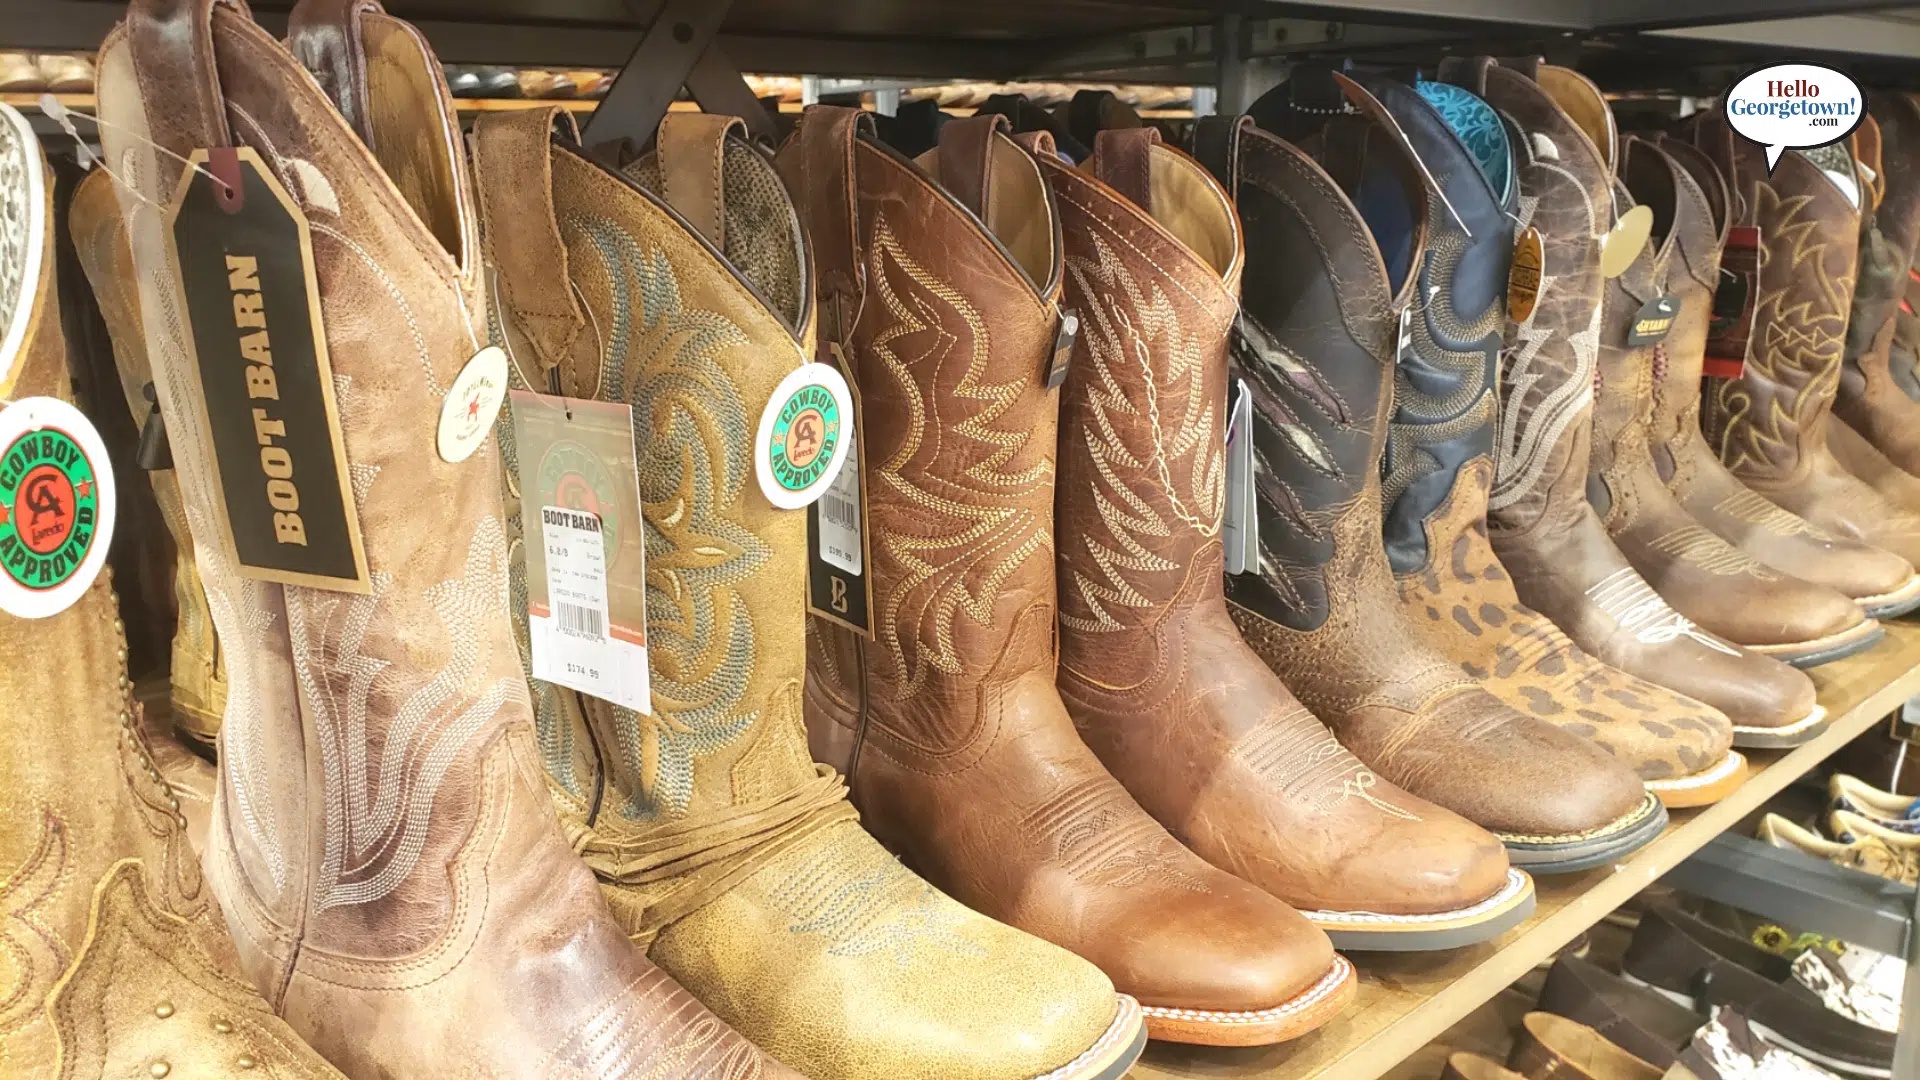 Boot Barn Grand Opening - The Market Place